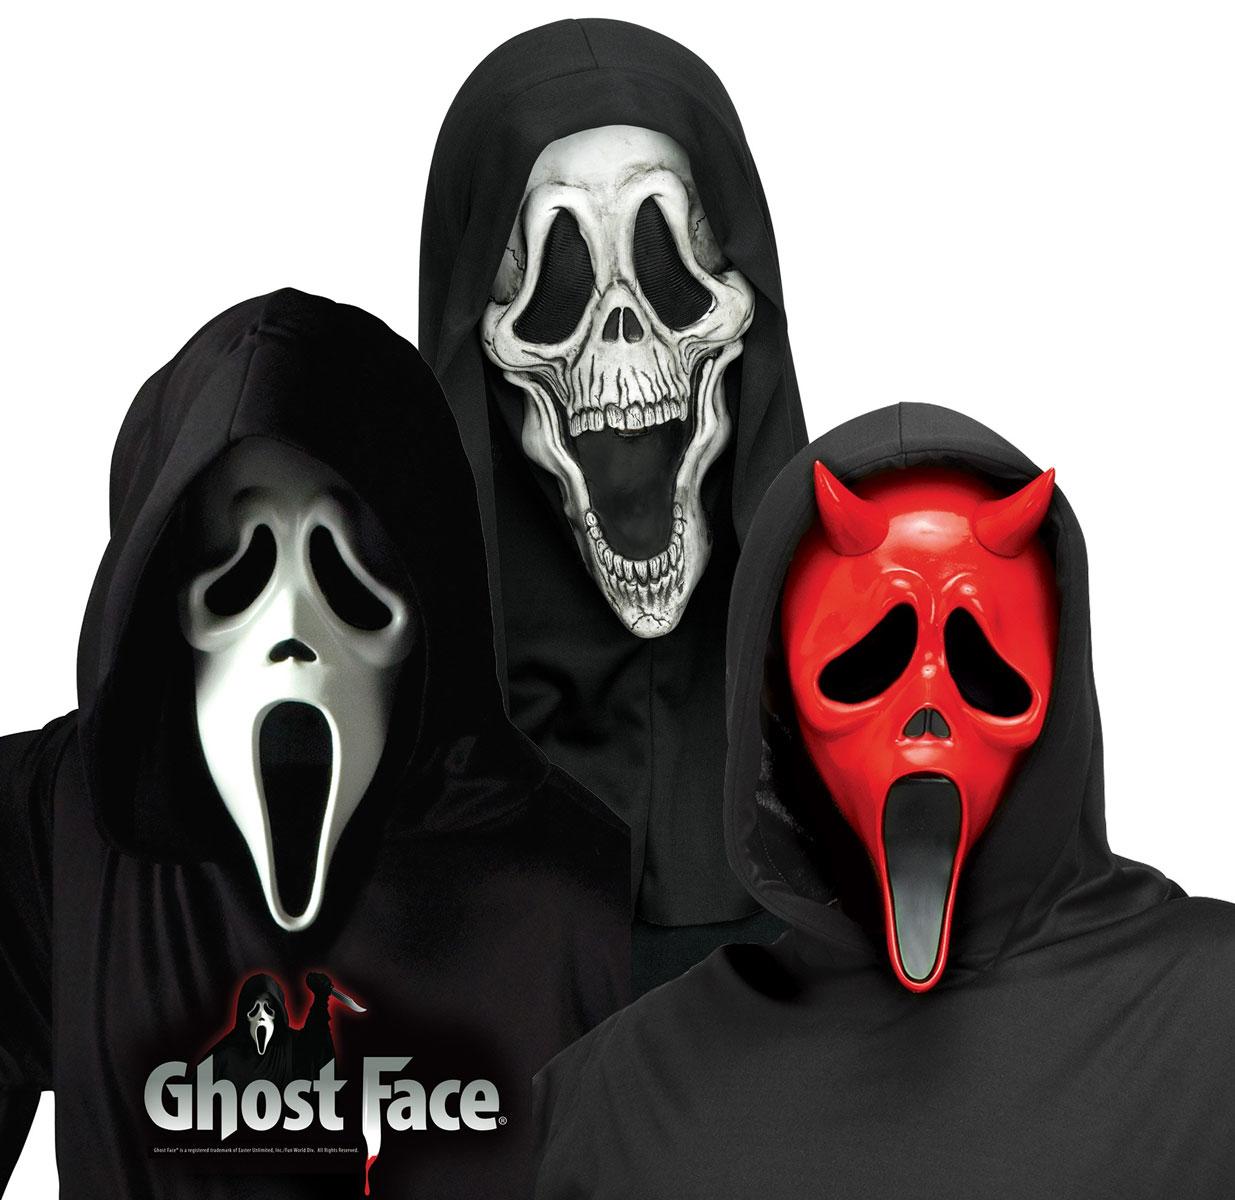 Deluxe Ghostface Mask - Ghost Face®  Masks by Fun World 93333 available here at Karnival Costumes online party shop